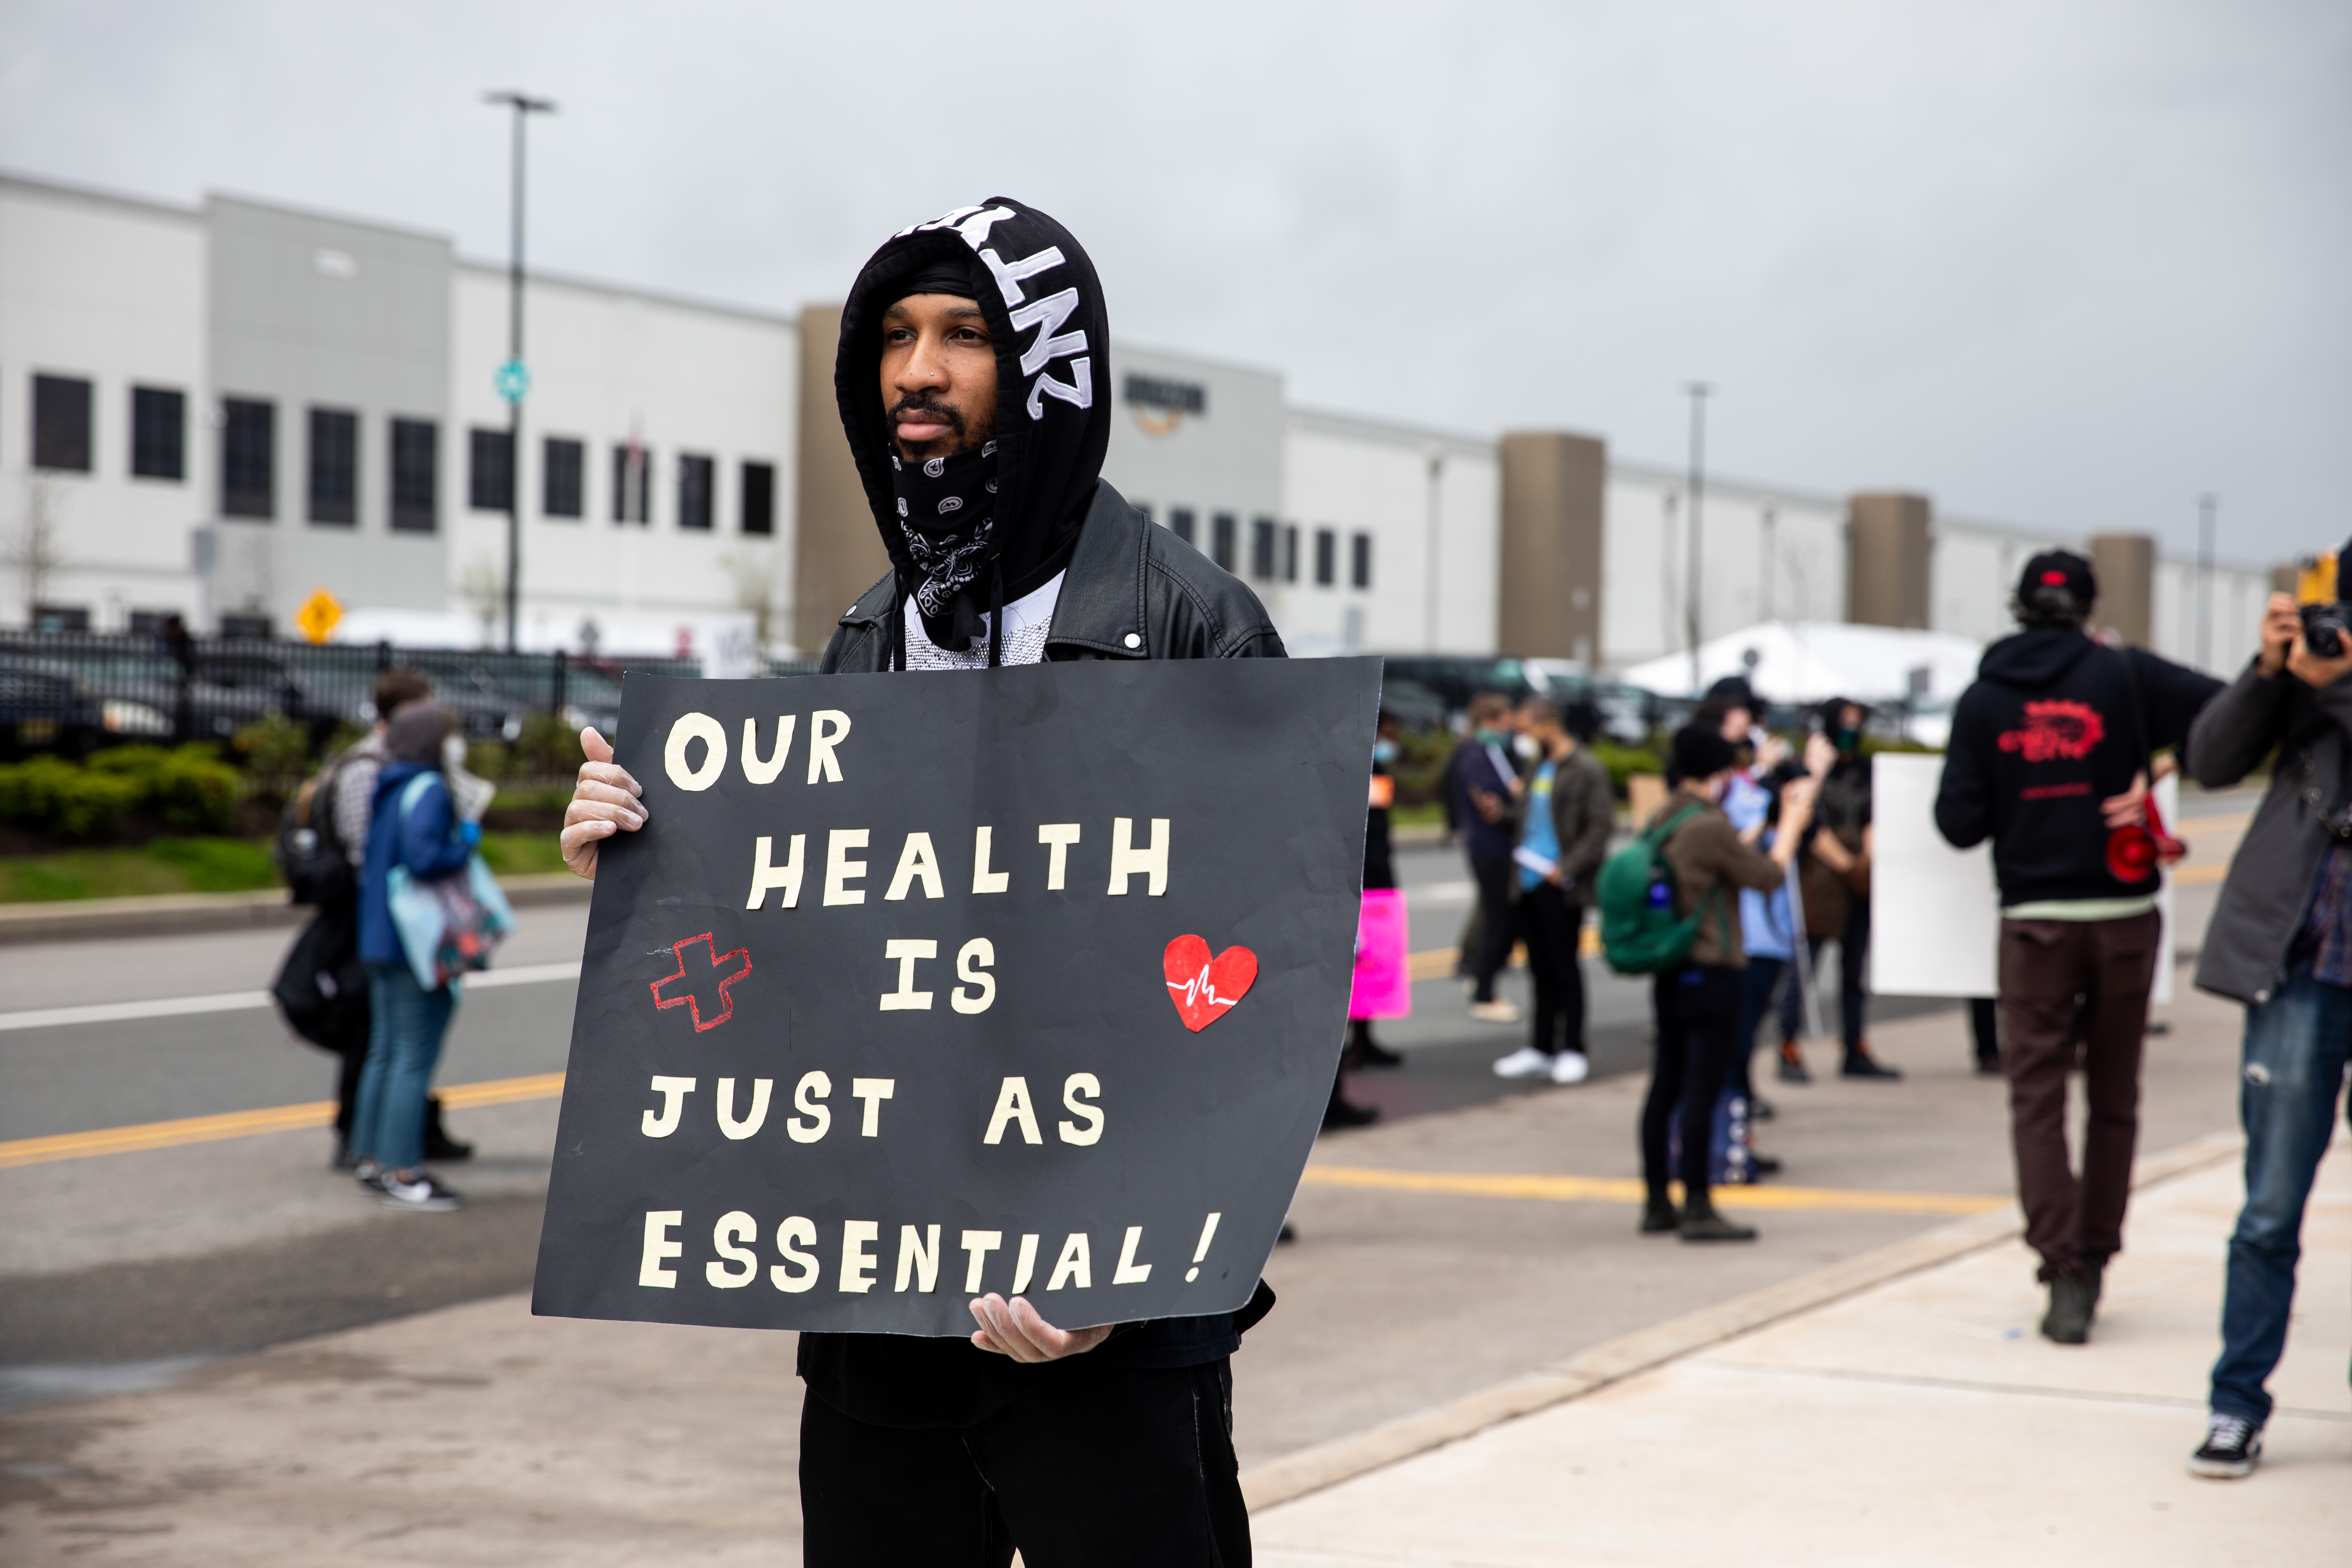 A protester standing outside an Amazon facility holds a sign that reads “Our health is just as essential.”